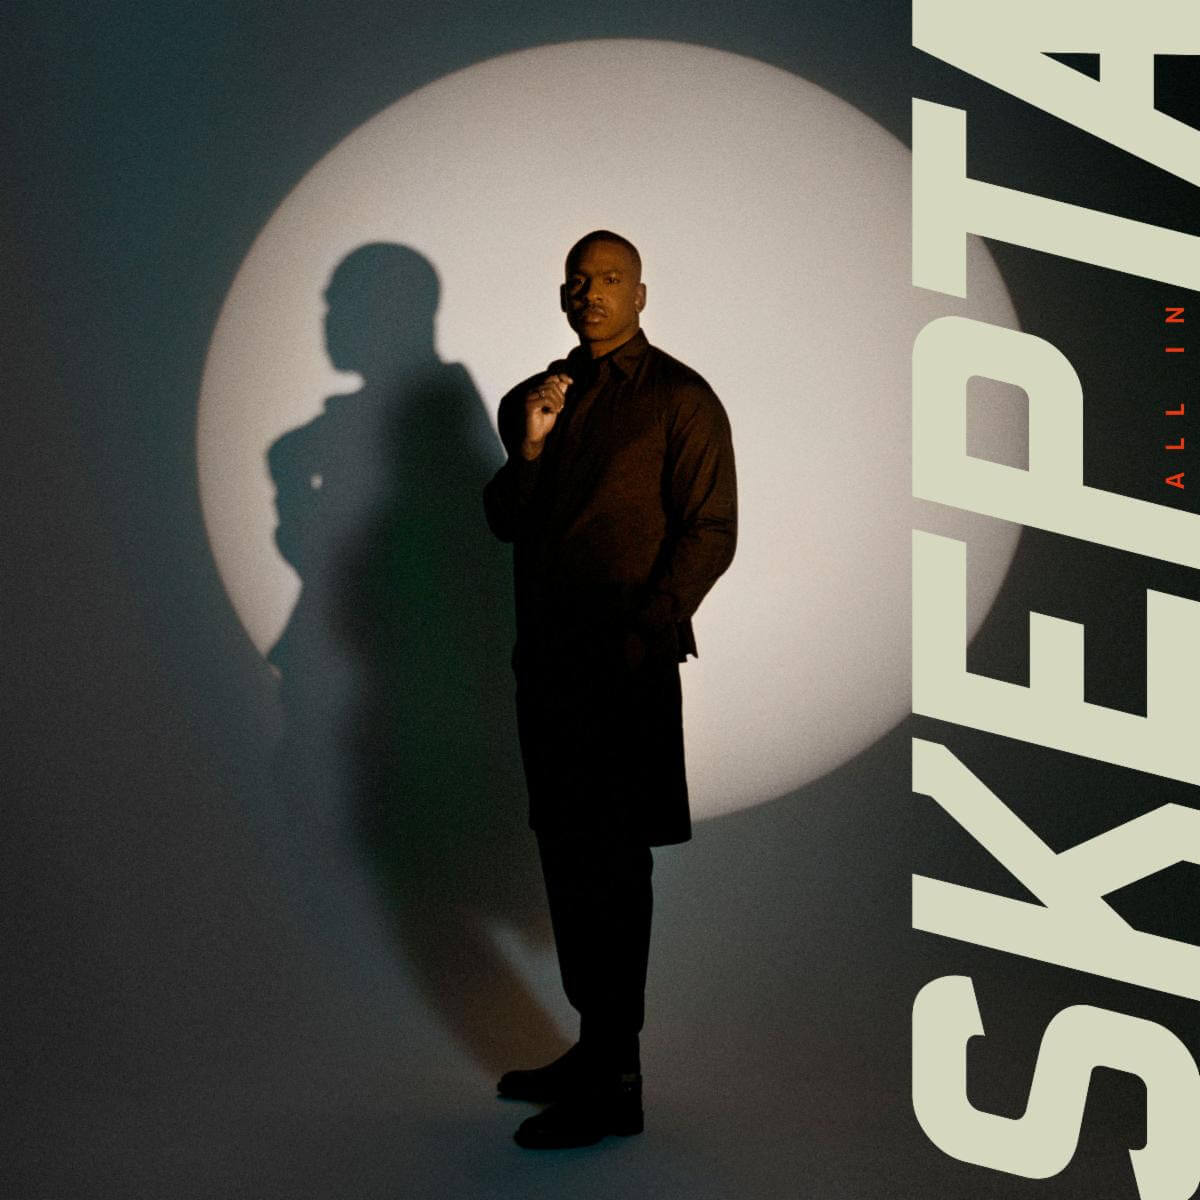 Skepta has shared a new visual for "Eyes on Me"